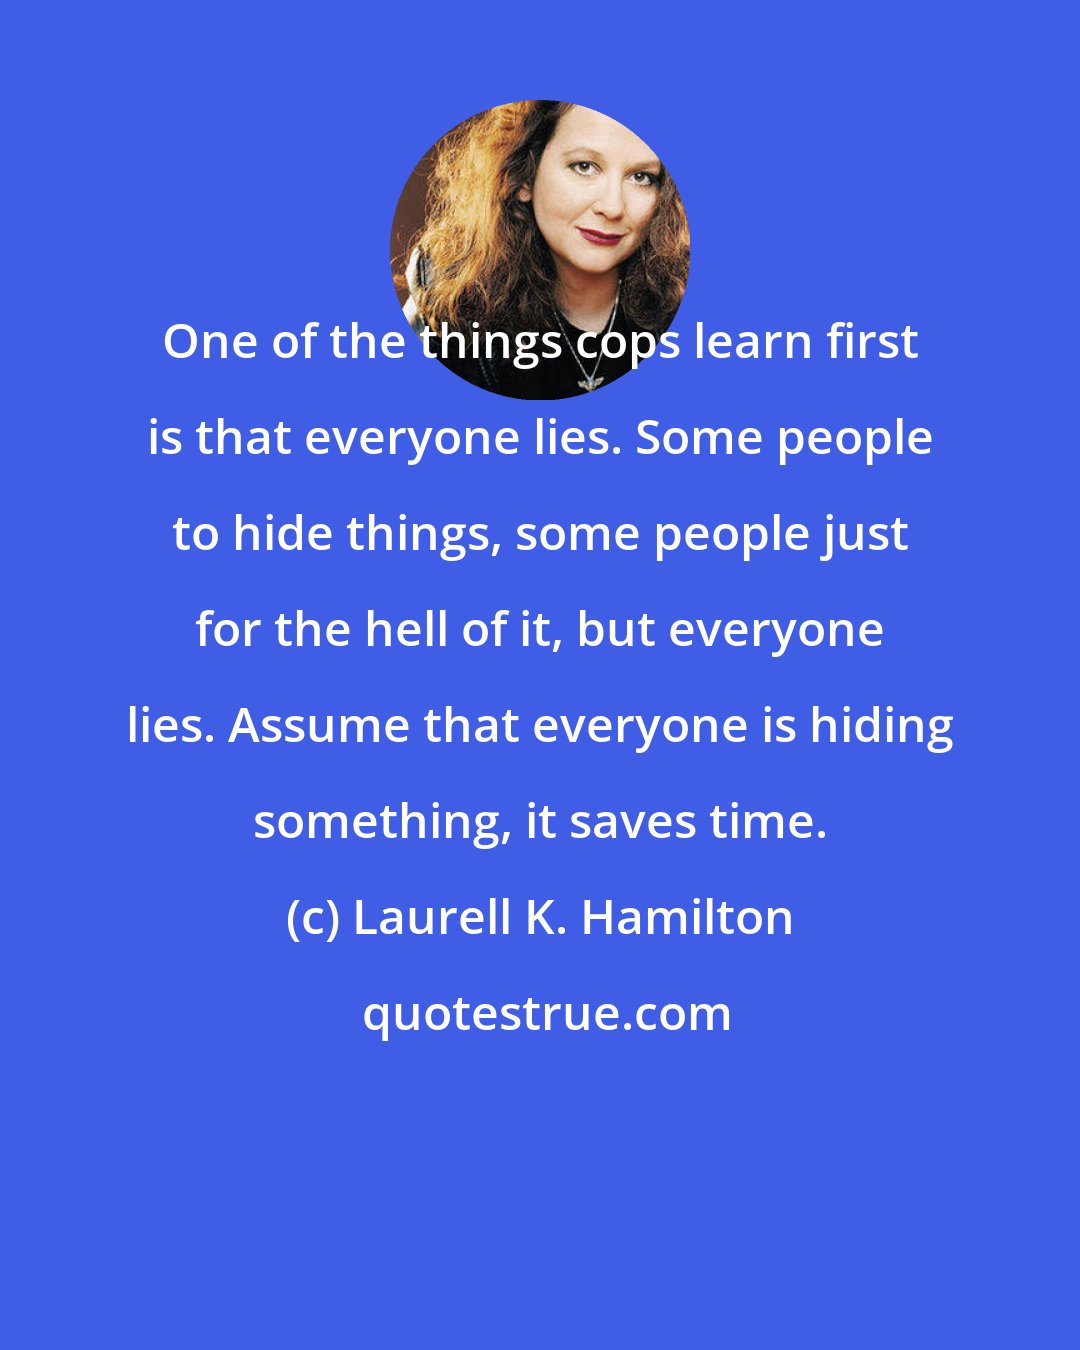 Laurell K. Hamilton: One of the things cops learn first is that everyone lies. Some people to hide things, some people just for the hell of it, but everyone lies. Assume that everyone is hiding something, it saves time.